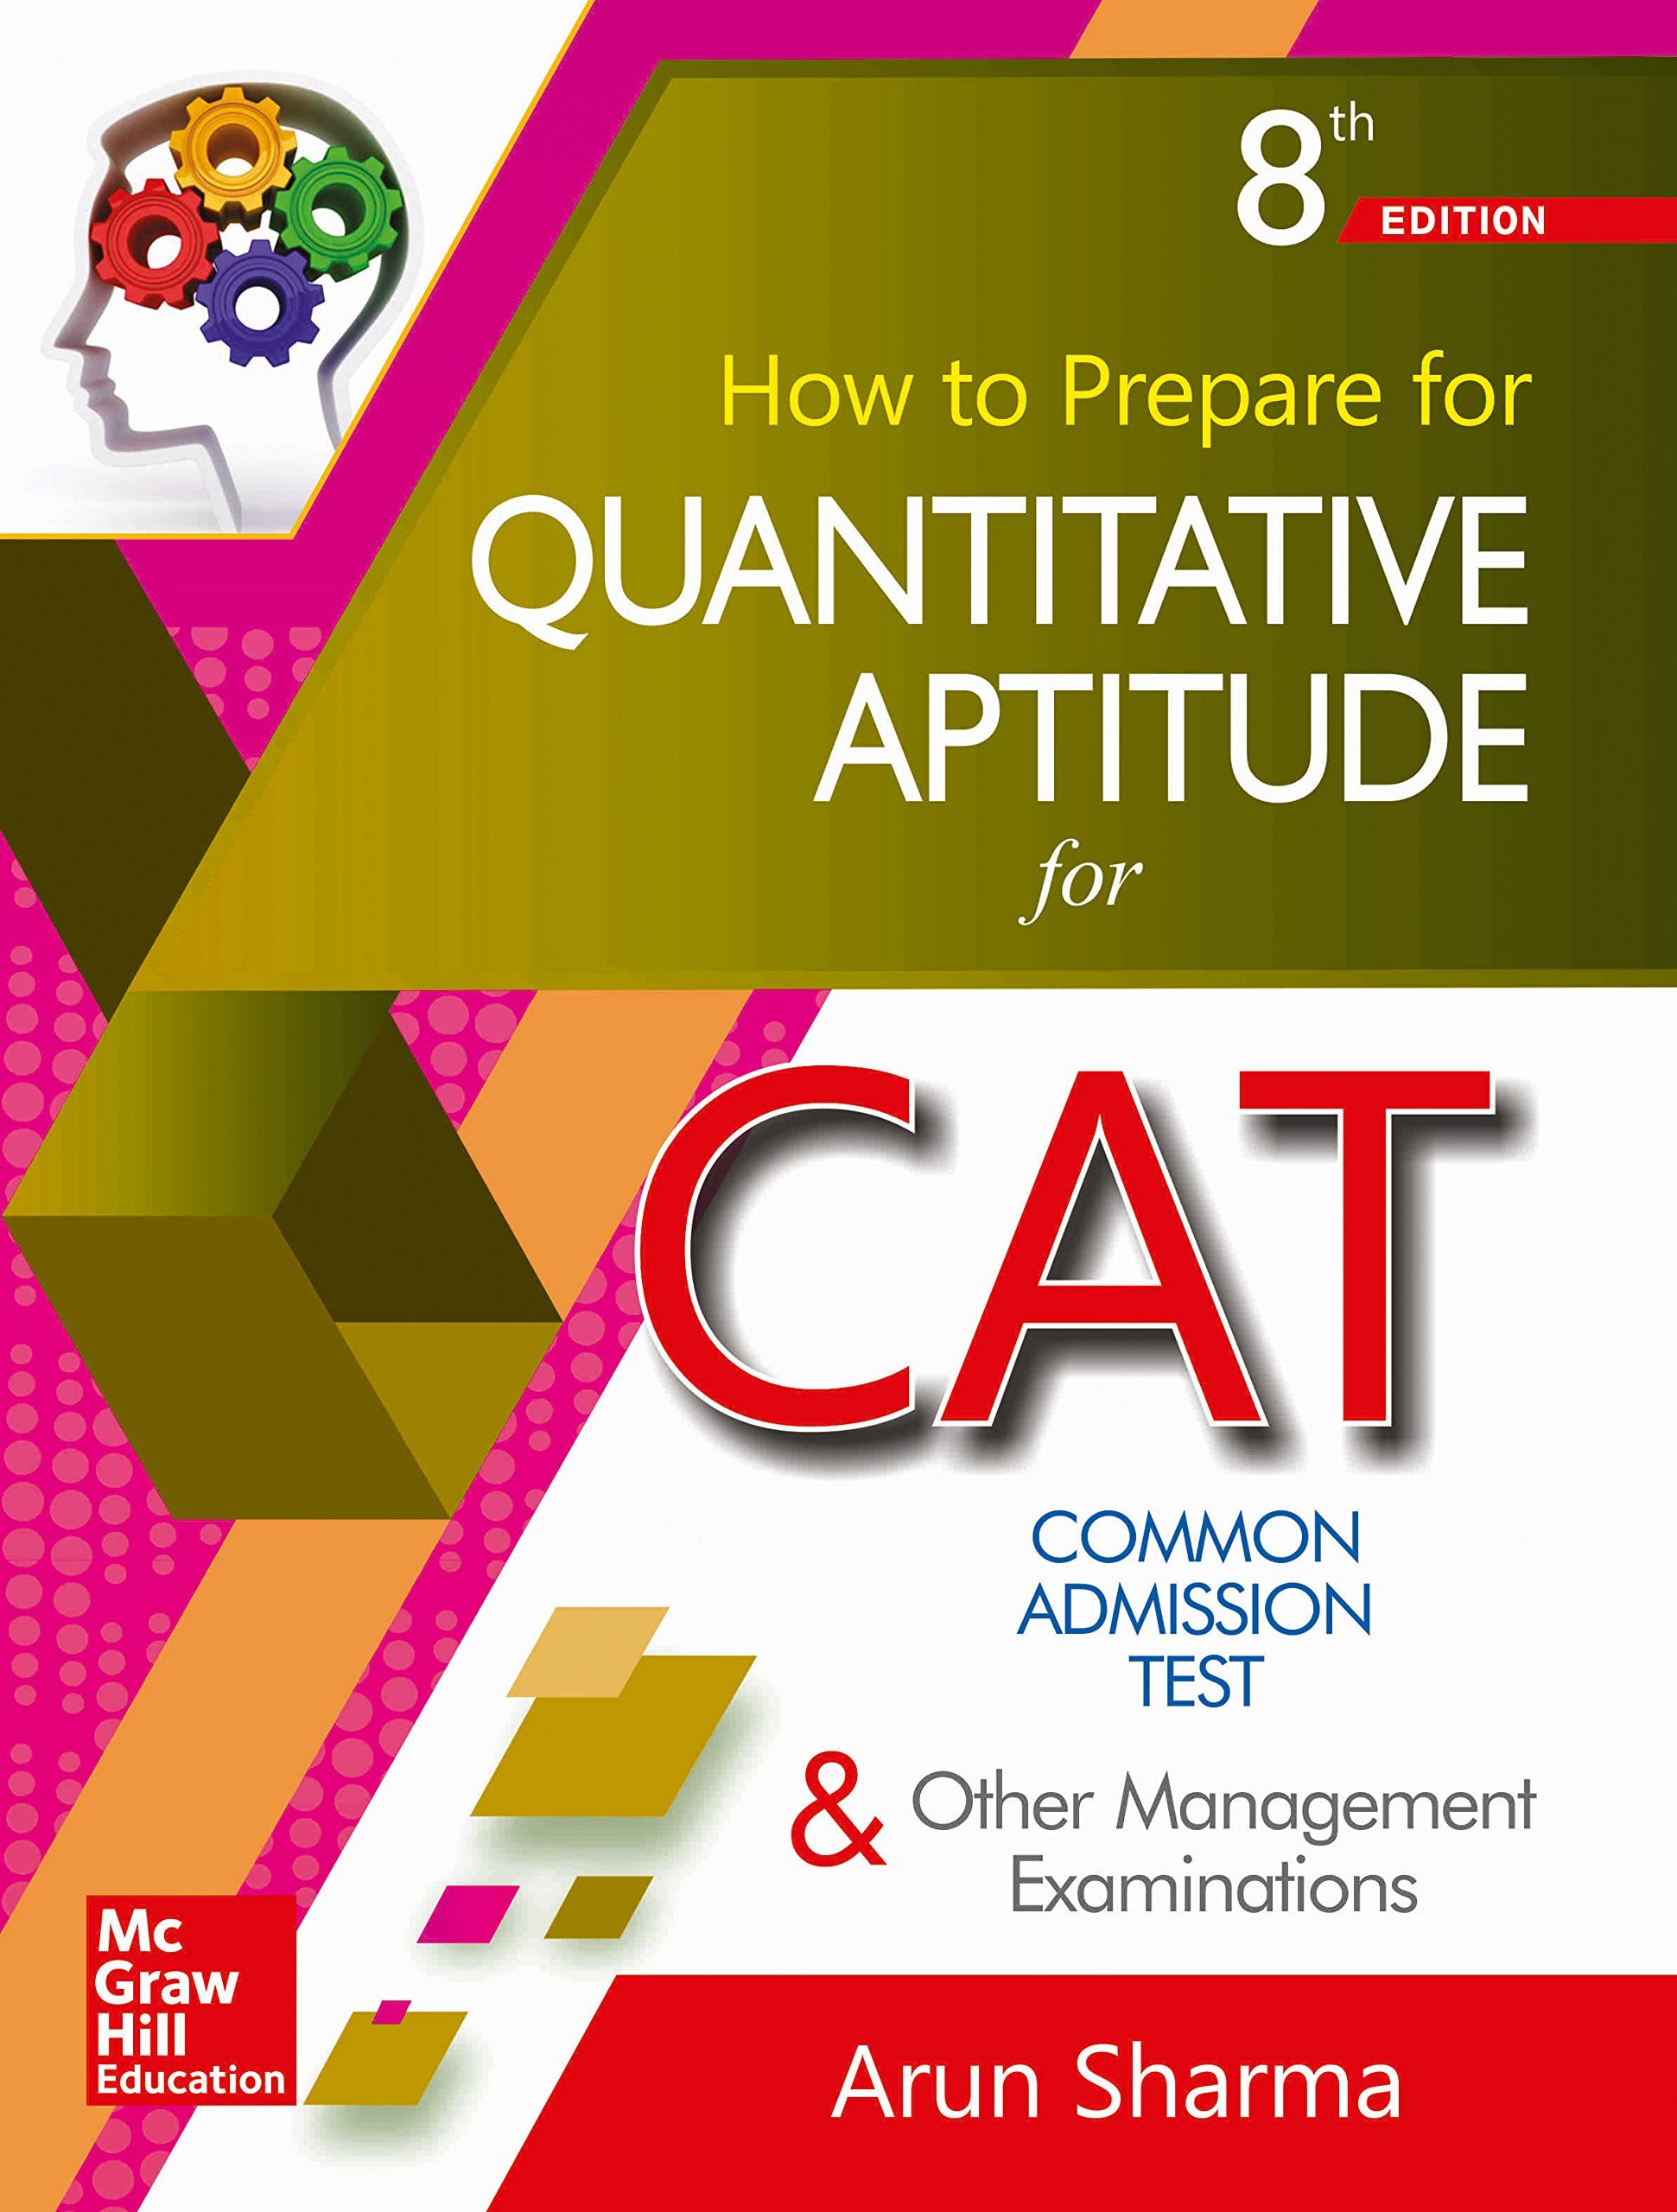 routemybook-buy-how-to-prepare-for-quantitative-aptitude-for-the-cat-by-arun-sharma-online-at